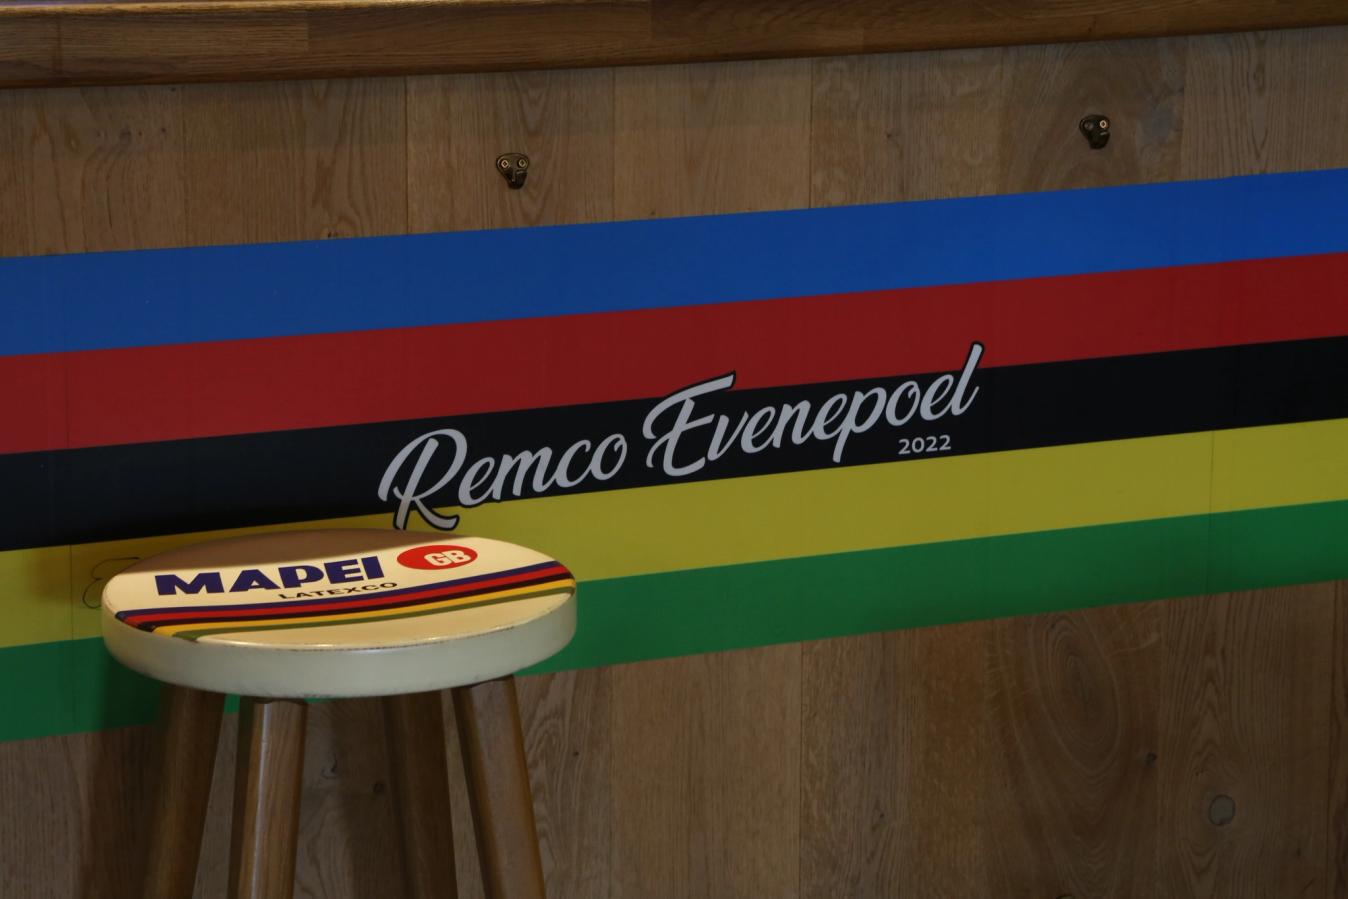 The bar has been painted in honour of Evenepoel's 2022 World Championship title